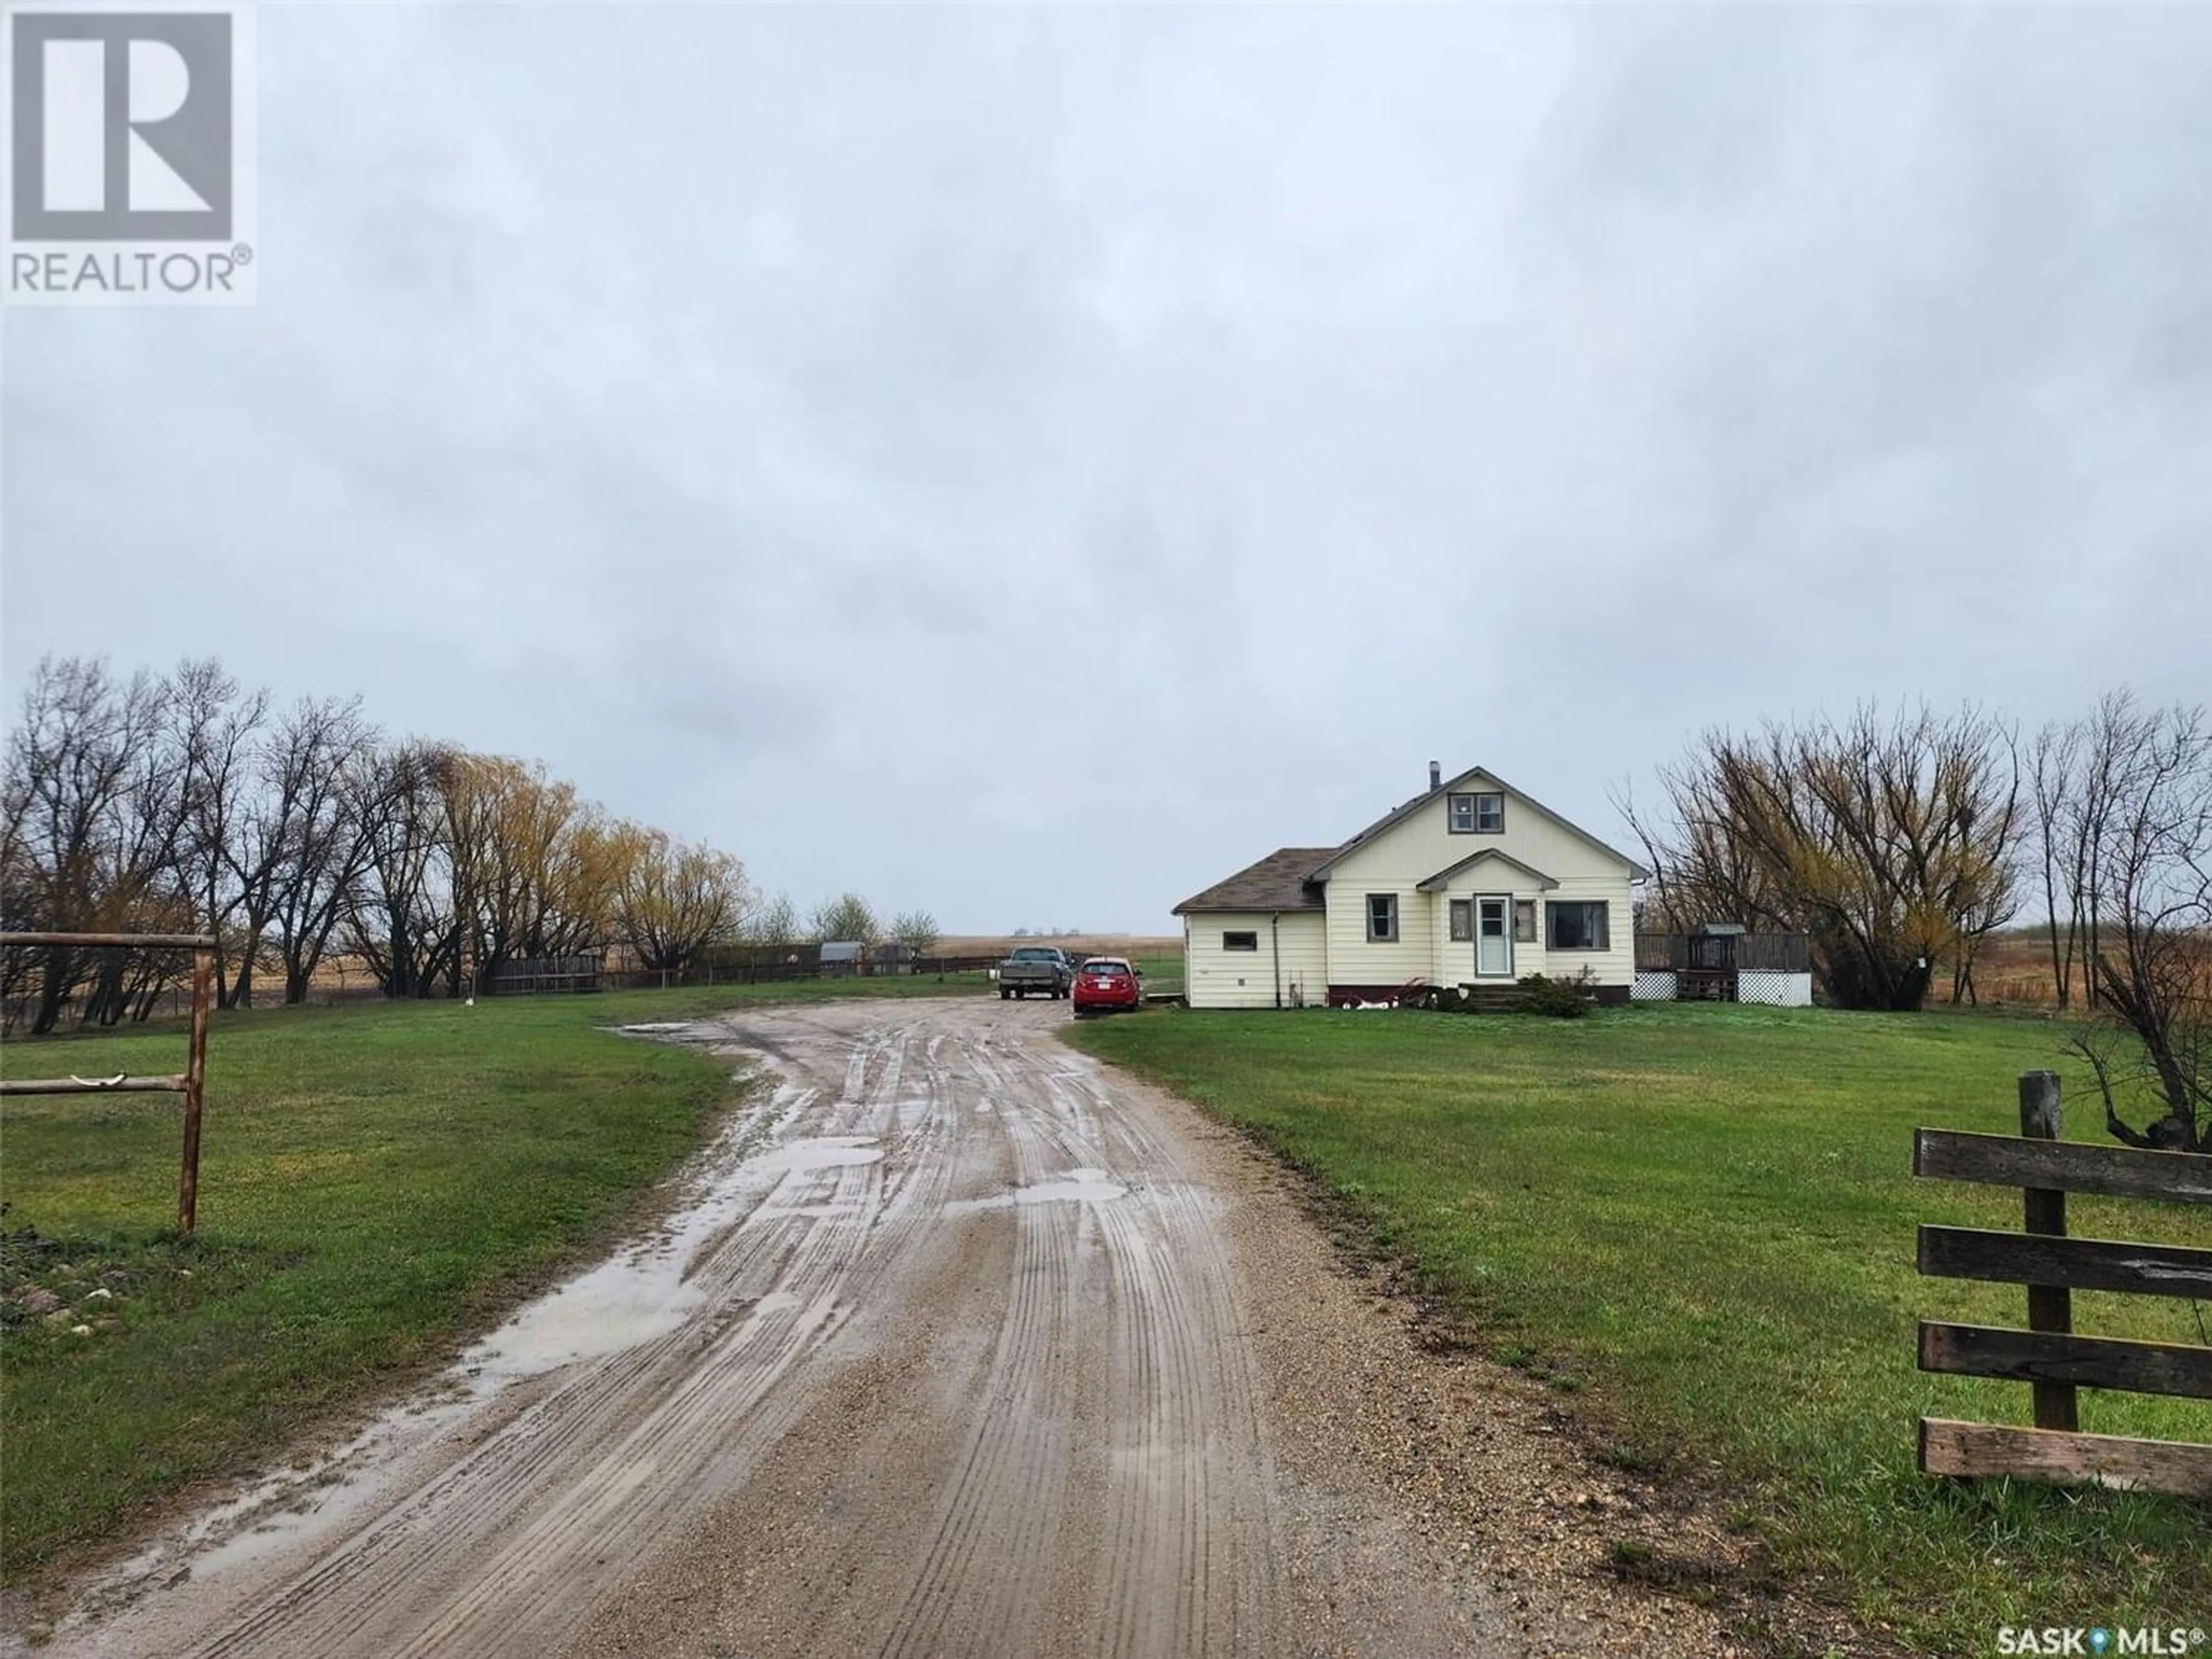 Frontside or backside of a home for THREE K FARMS 9.97 acres SW 08-16-10 W2n, Wolseley Rm No. 155 Saskatchewan S0G5H0